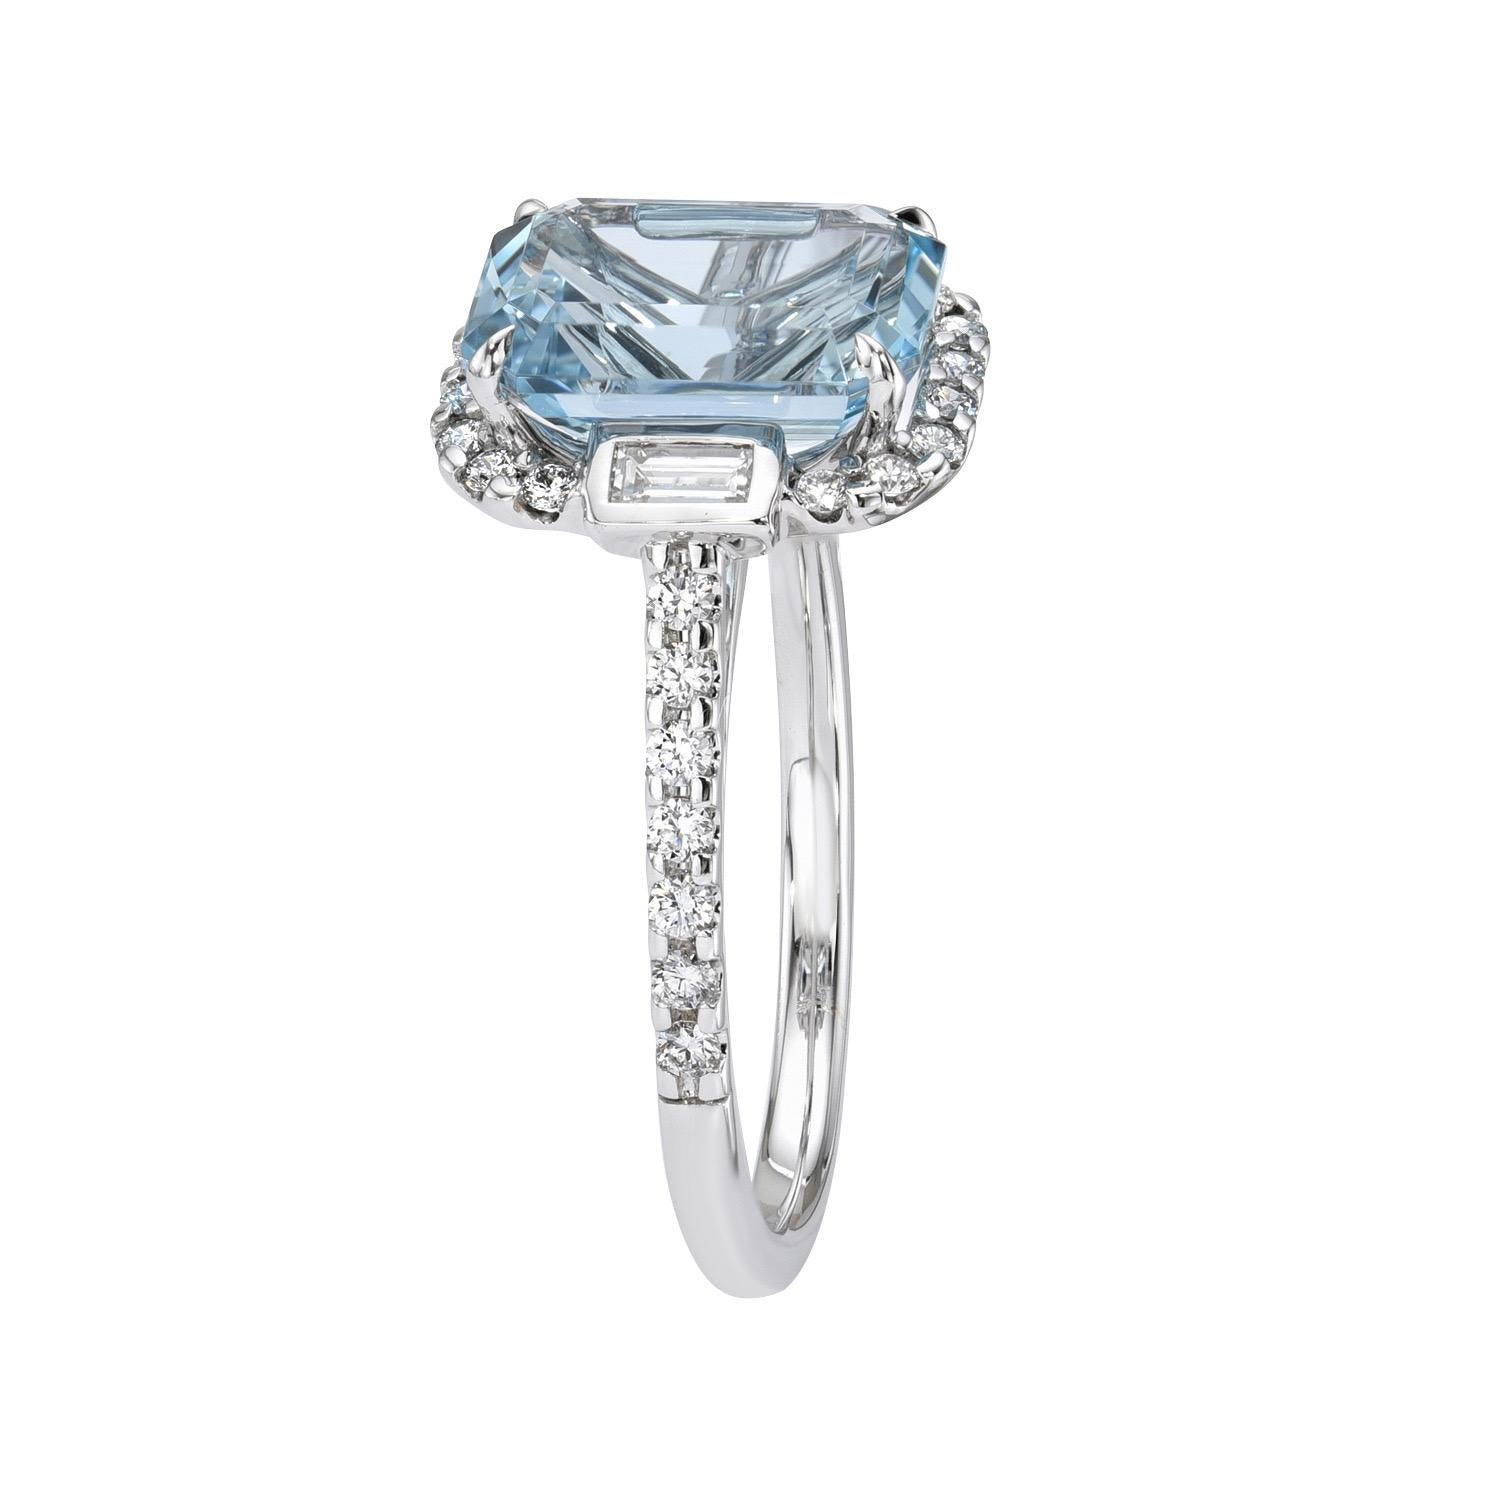 Marvelous 2.64 carat Aquamarine Emerald Cut, 18K white gold ring, decorated with a pair of 0.13 carat Baguette collection diamonds, and a total of 0.31 carat collection round brilliant diamonds.
Ring size 6.5. Resizing is complementary upon